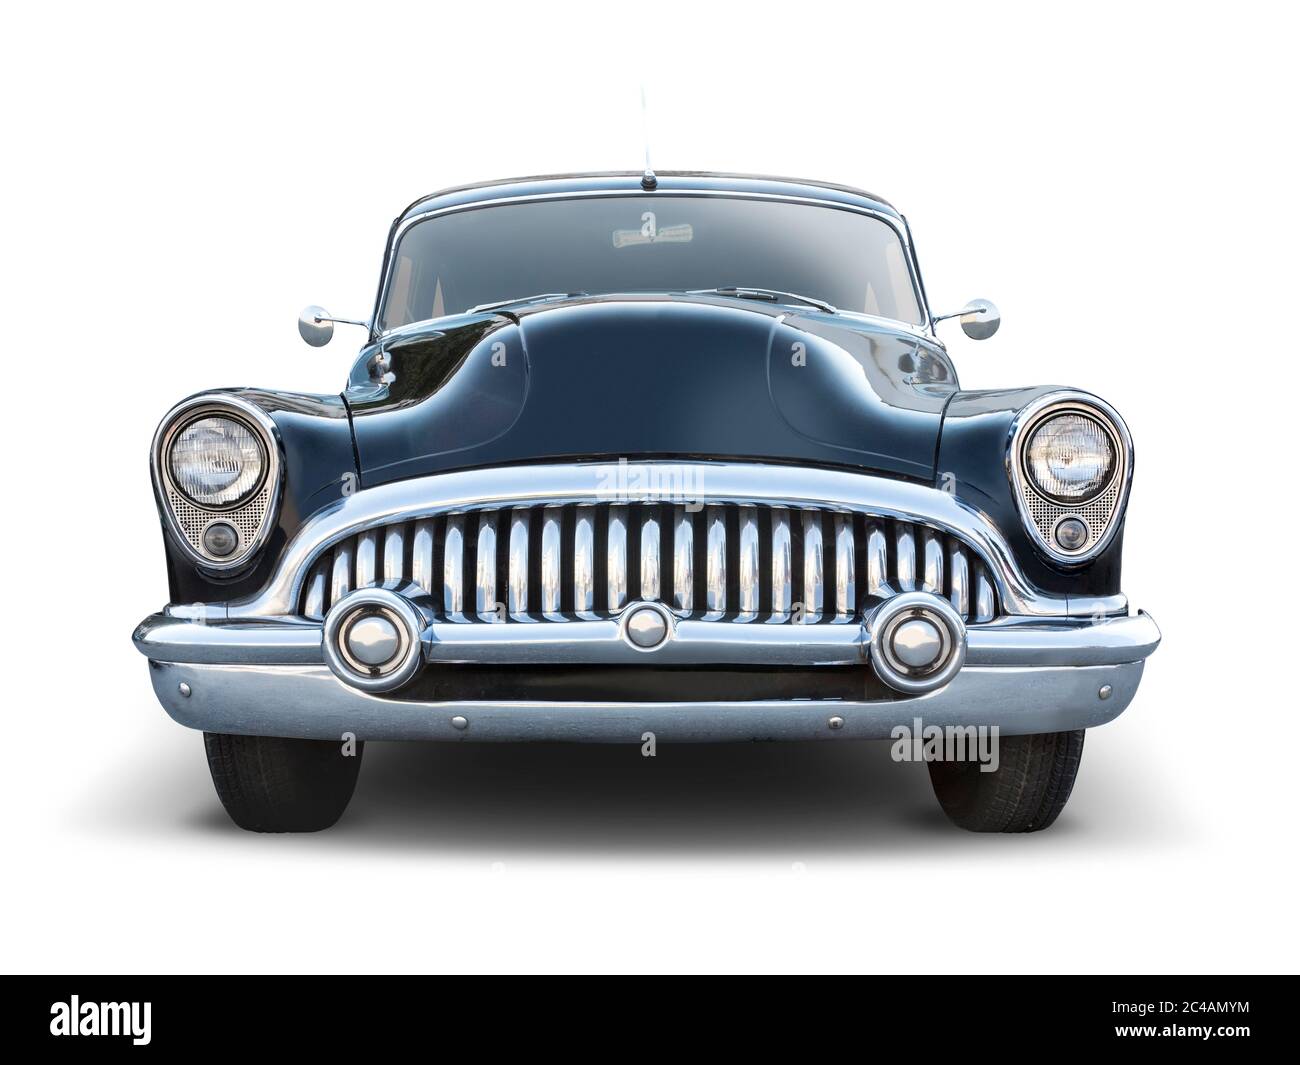 Classic American car front view isolated on white Stock Photo